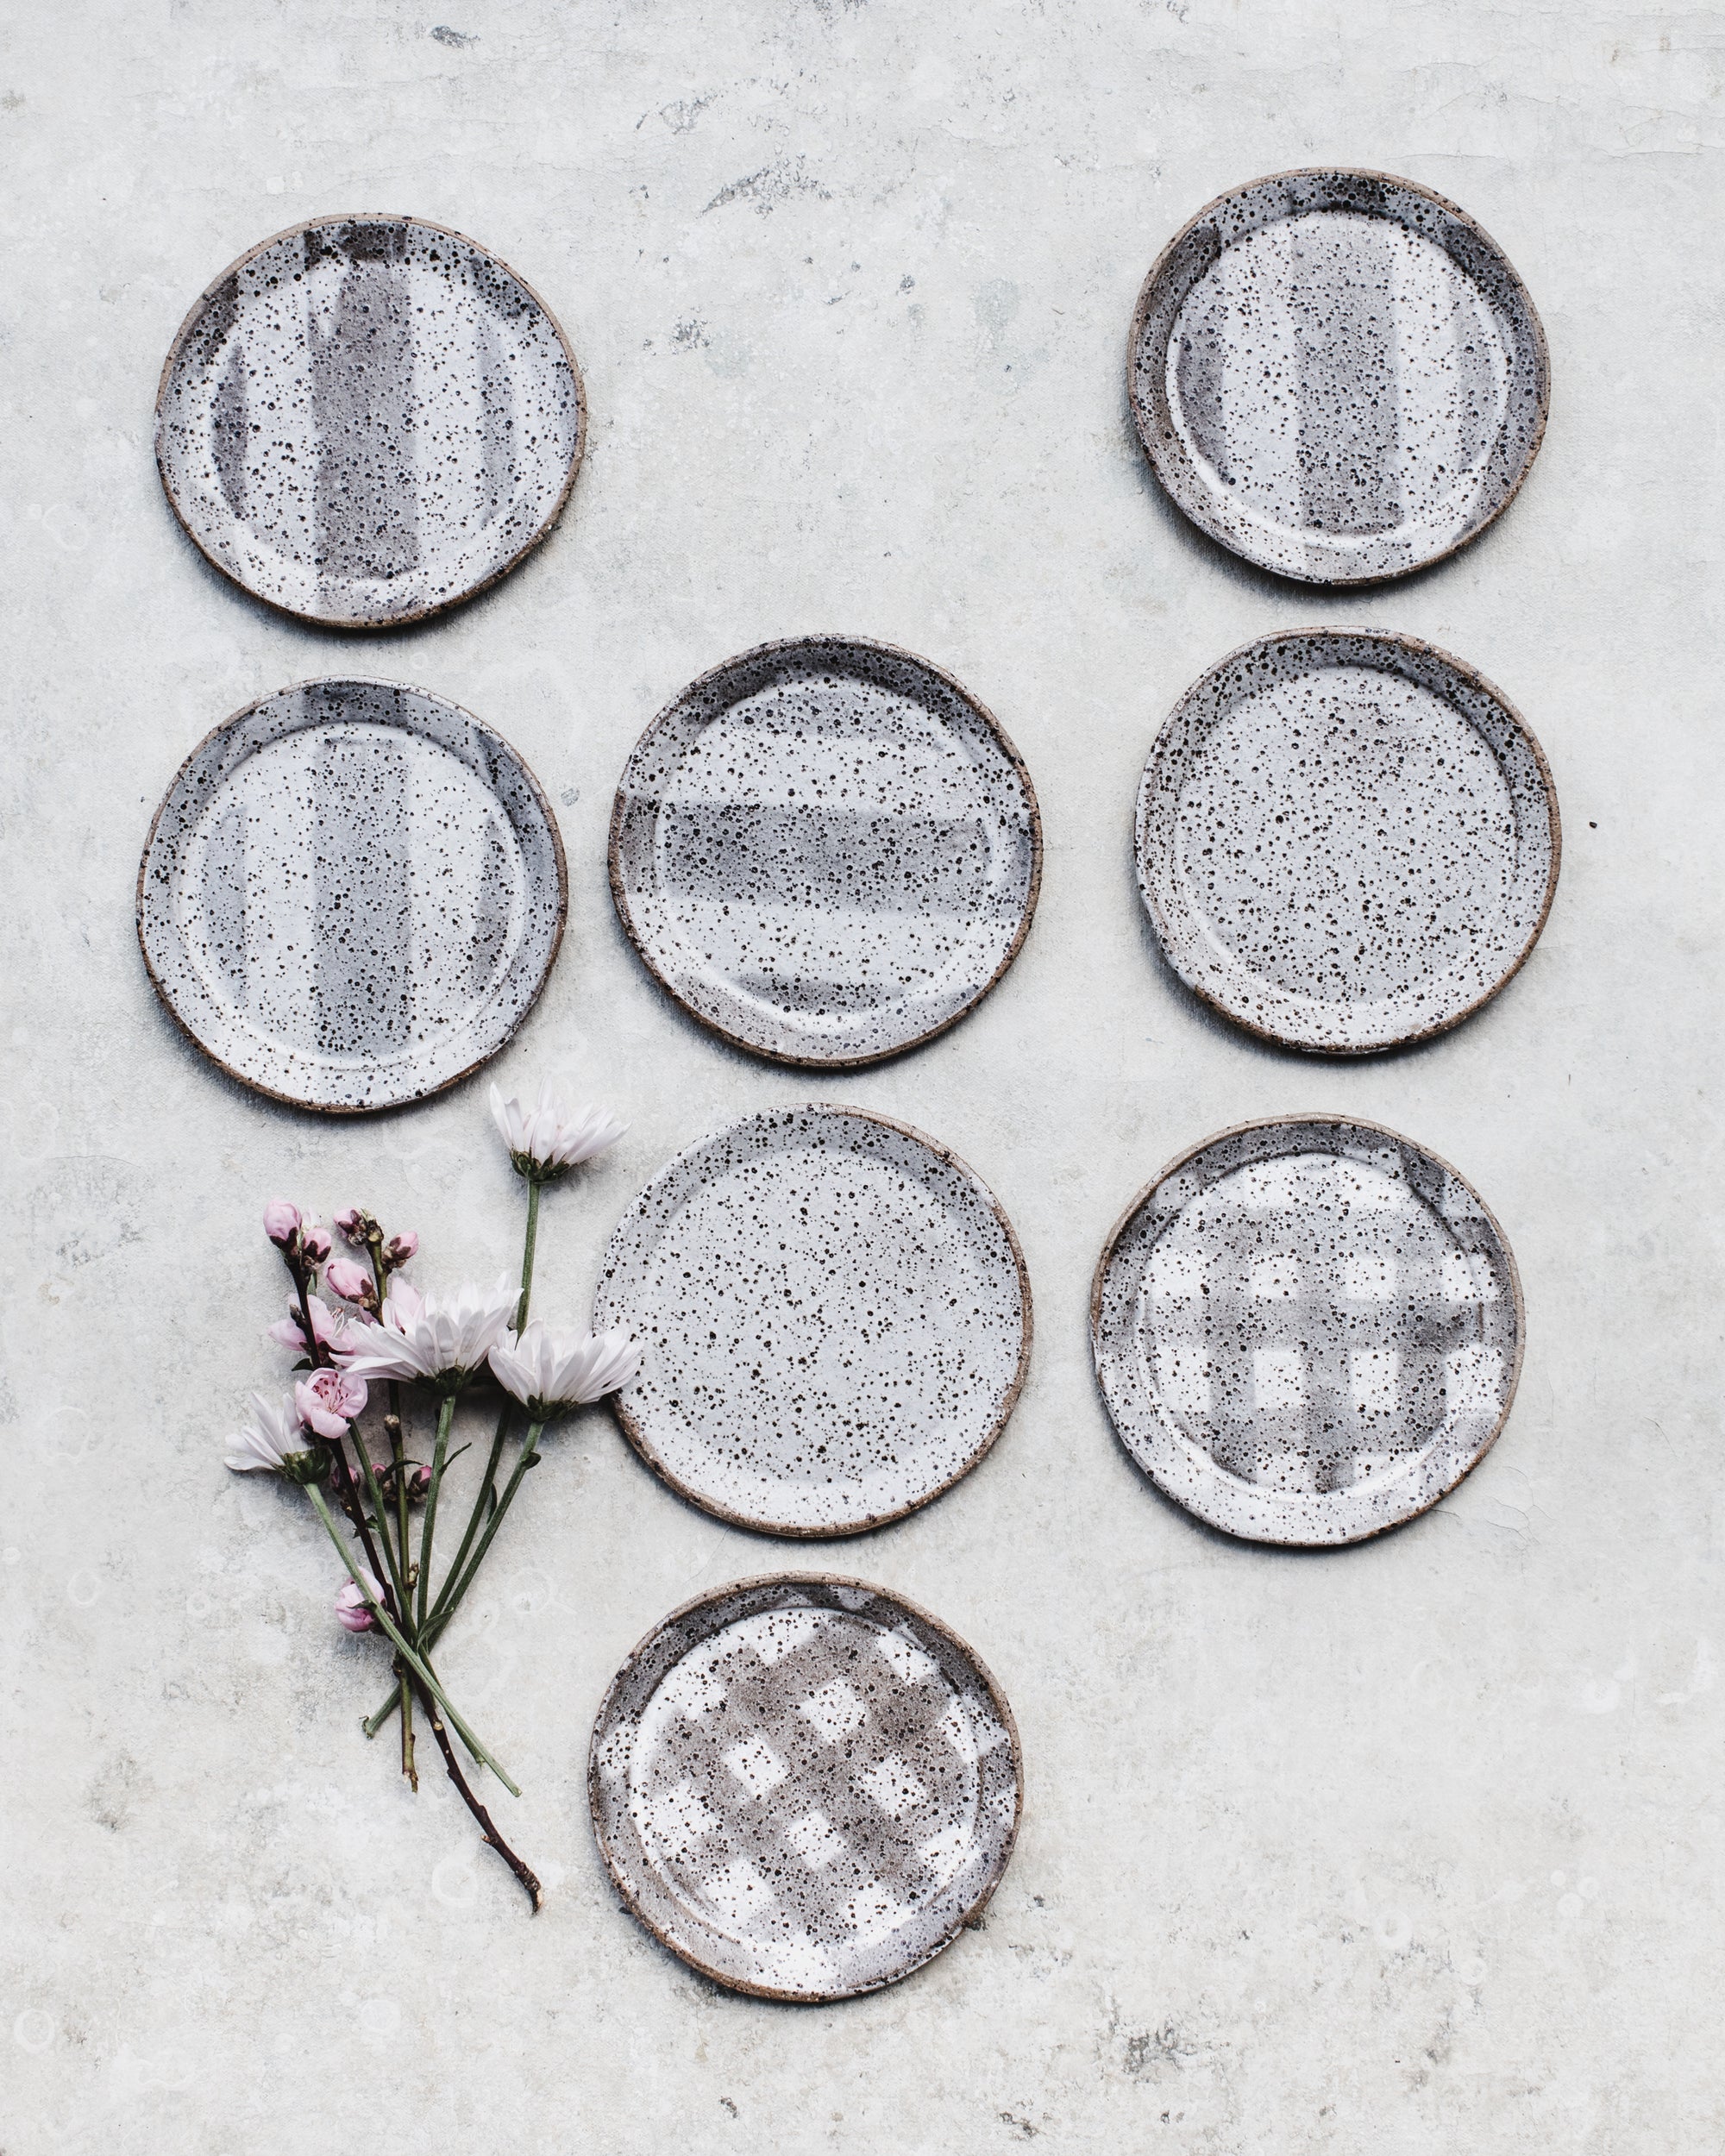 Handmade rustic gritty plates with line, grid and white speckles by Clay Beehive ceramics